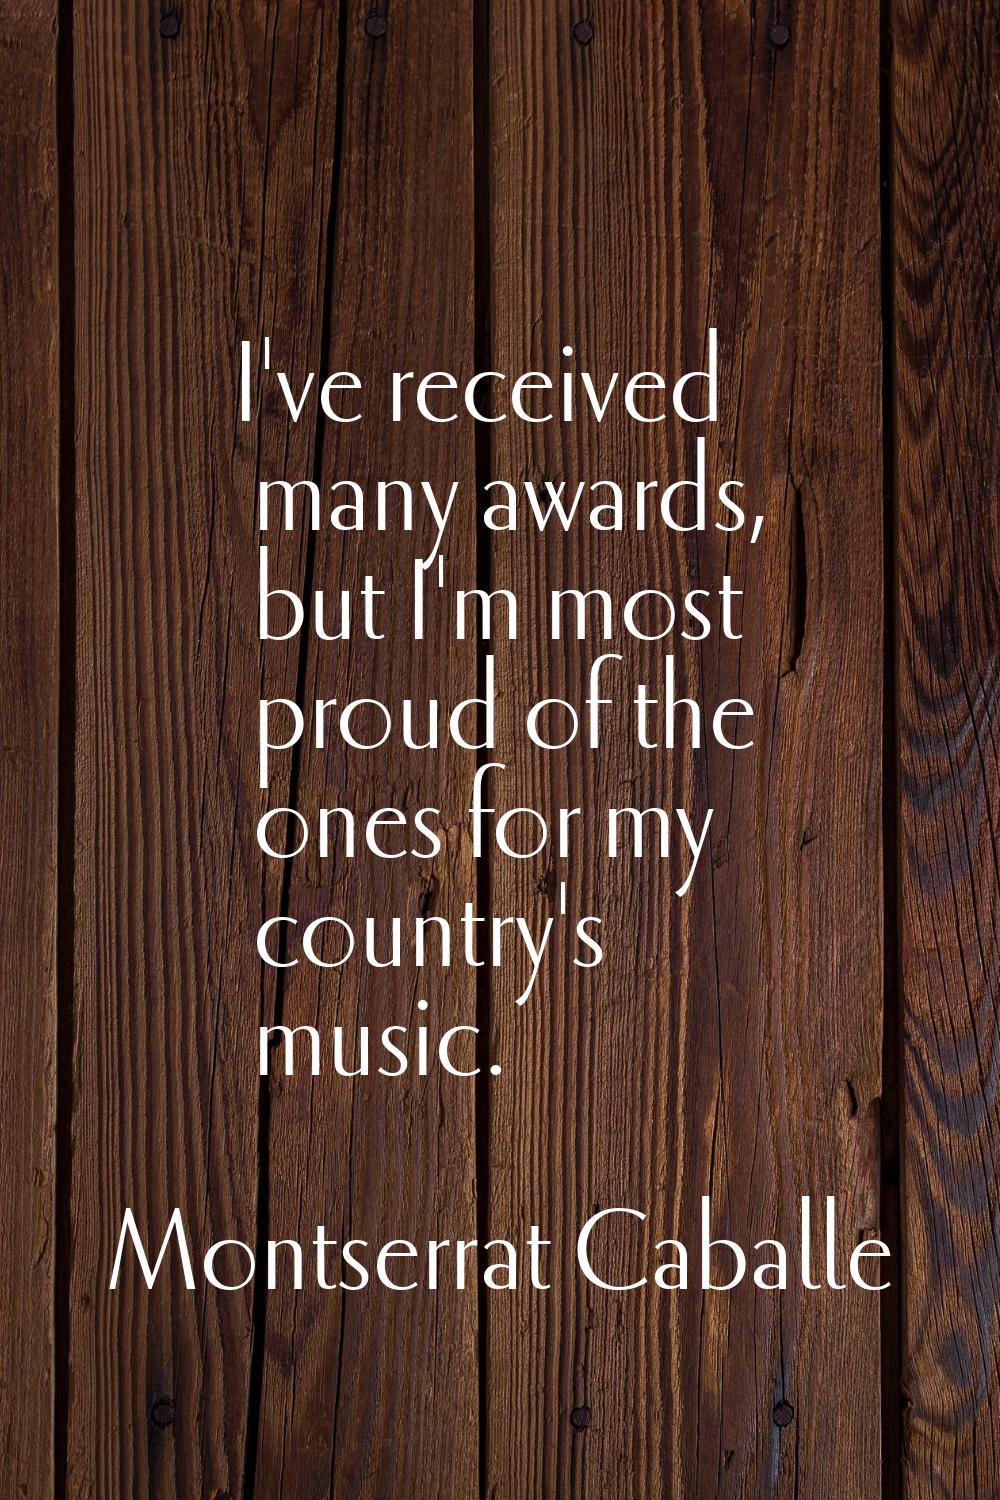 I've received many awards, but I'm most proud of the ones for my country's music.